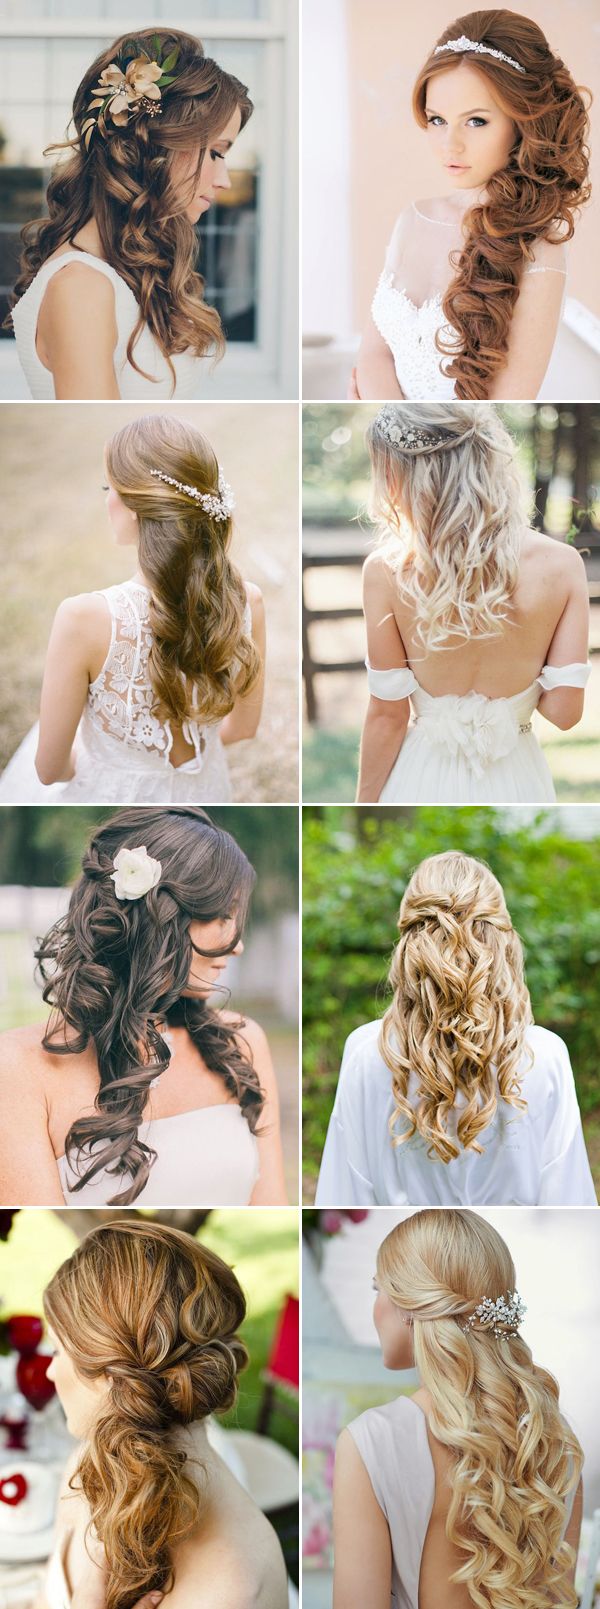 Wedding Hairstyle For Long Hair 16 Gorgeous Half Up Half